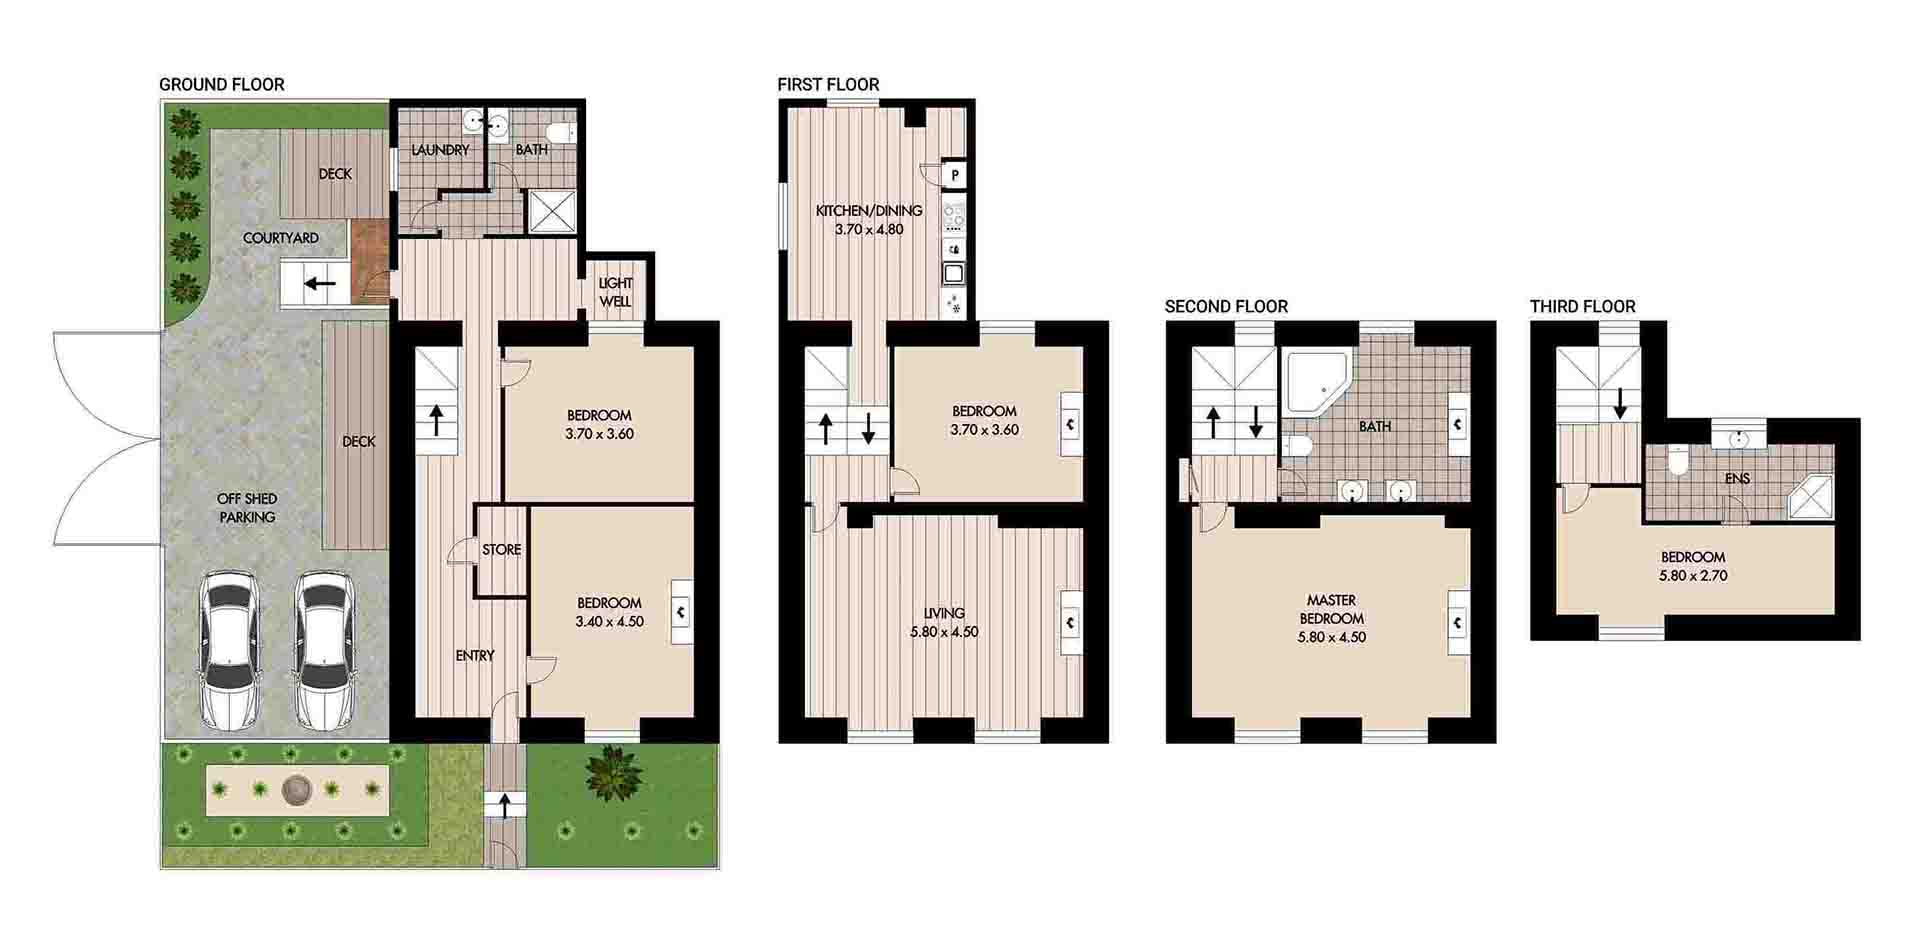 floor plans and site plans